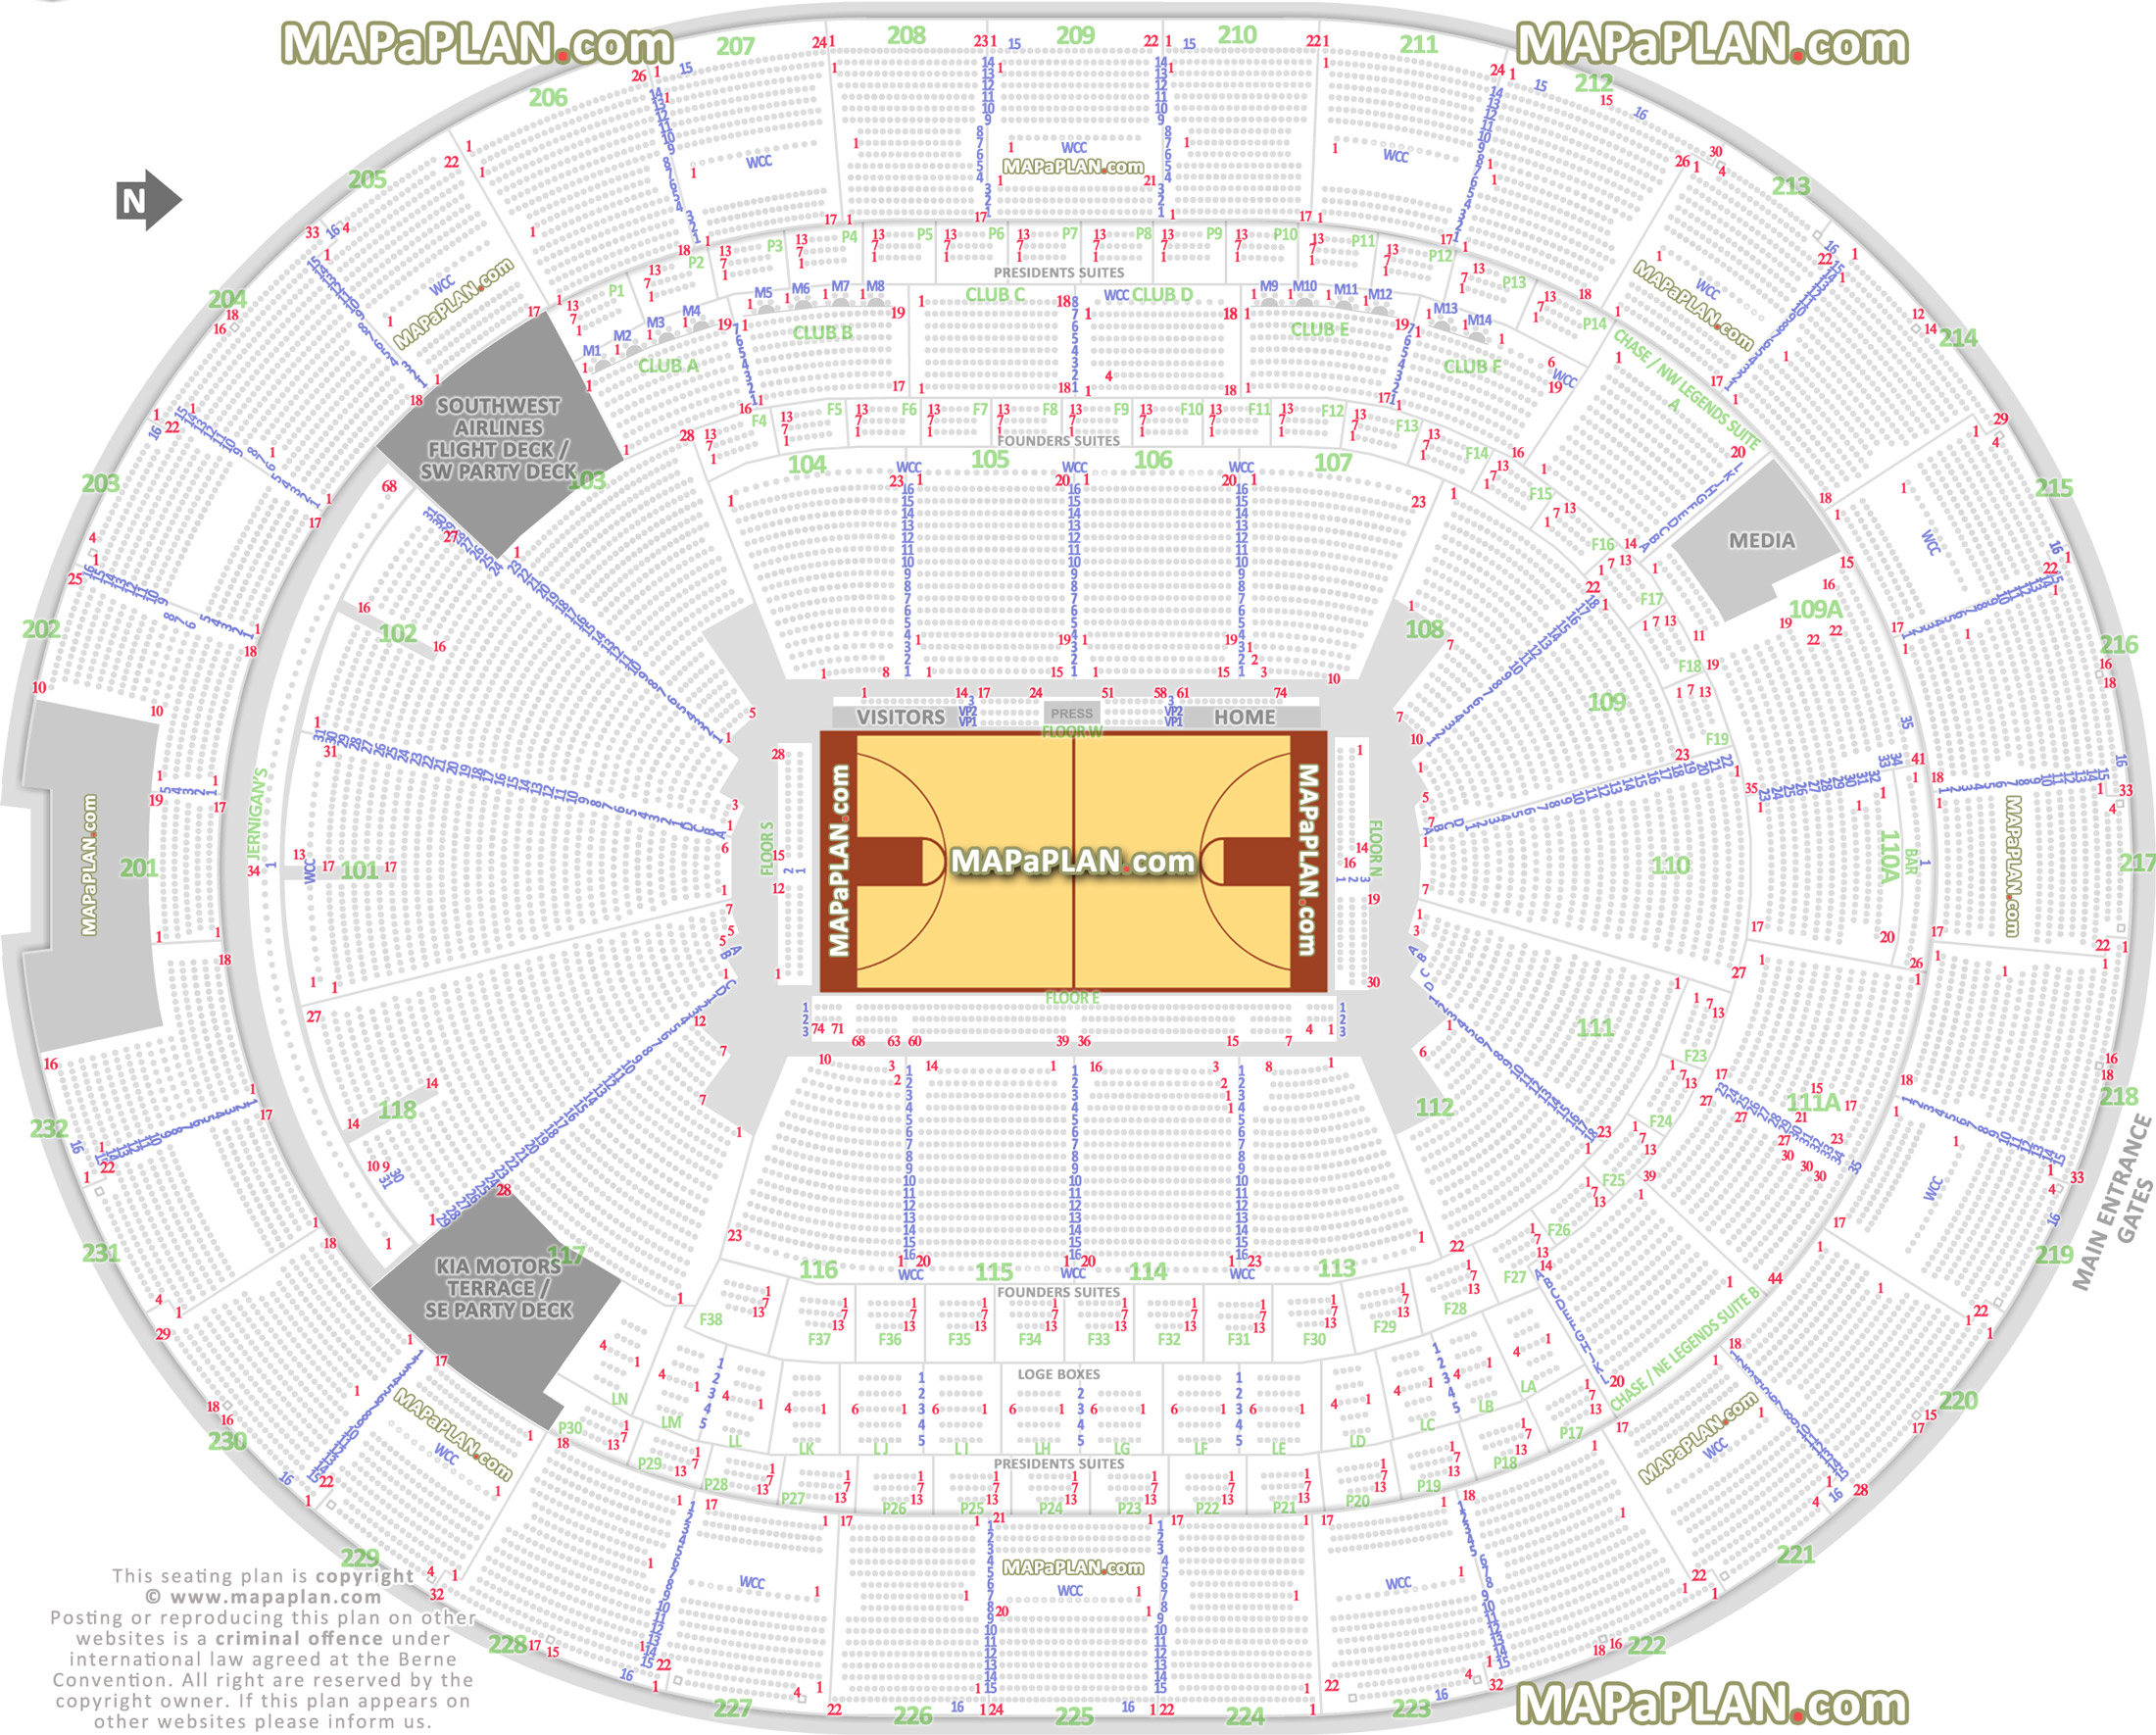 orlando magic stadium nba basketball game court exact venue map individual find seat locator courtside home side area bench superstar ultimate Orlando Kia Center seating chart